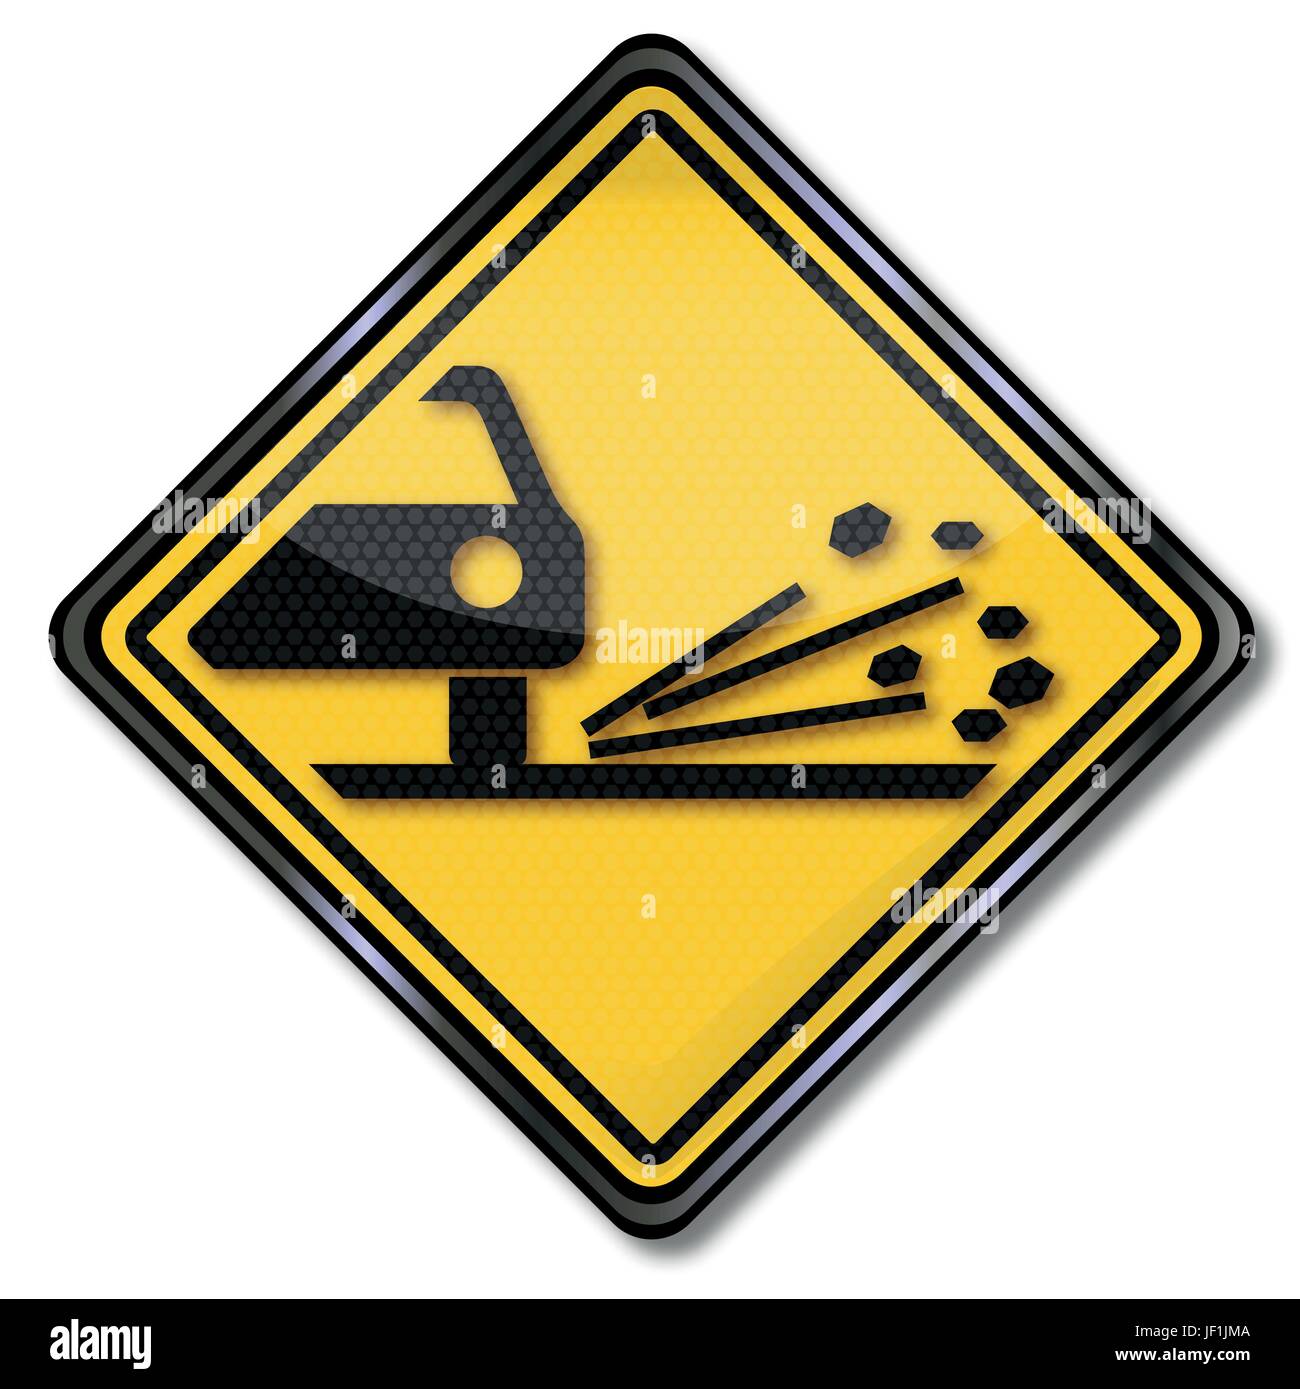 rhombus, lacquer, car paint, damage to the paintwork, yellow, danger, stone, Stock Vector